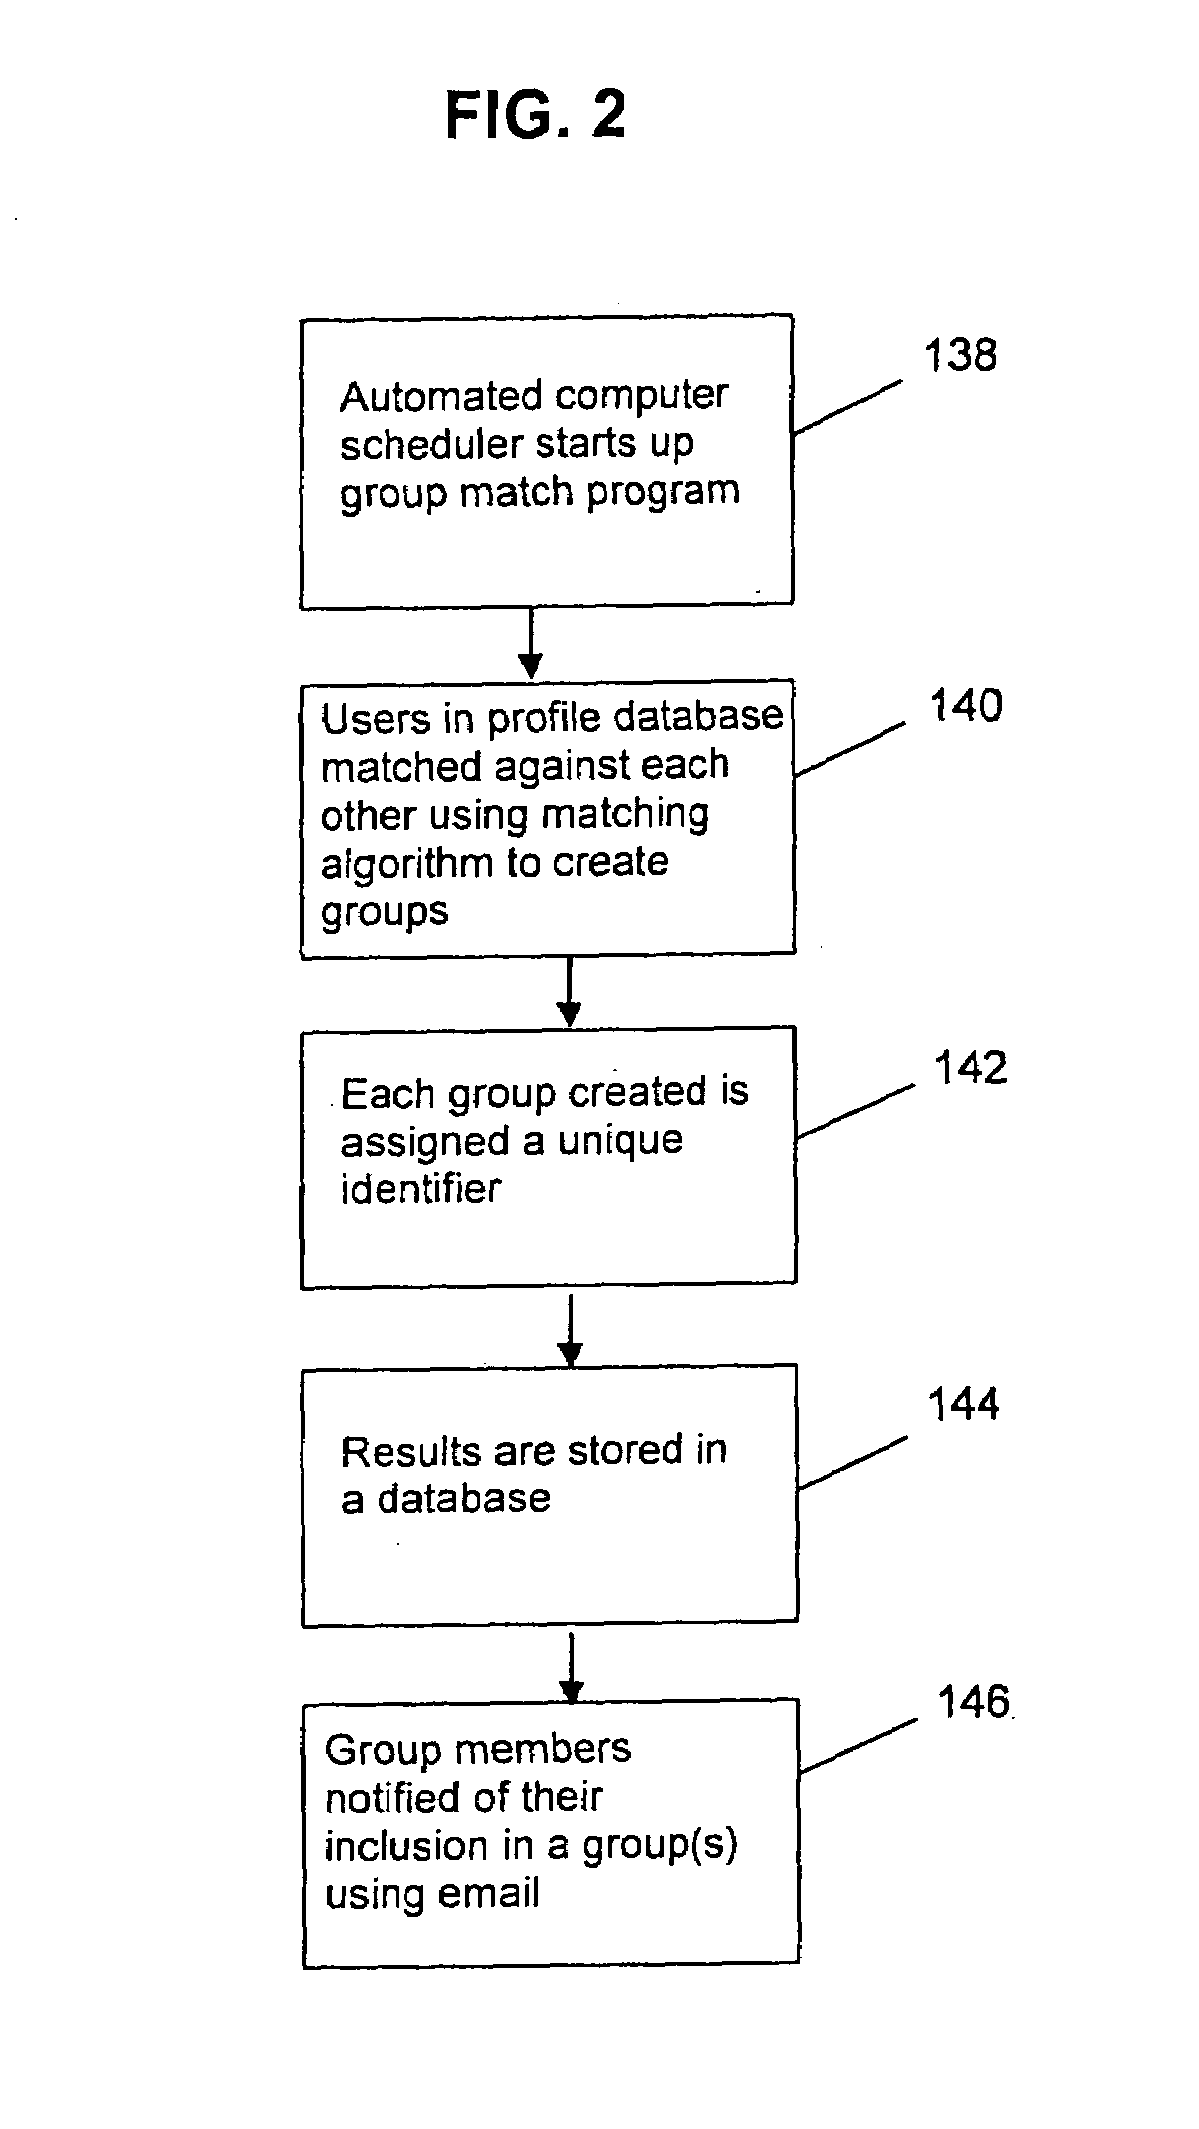 Method for grouping computer subscribers by common preferences to establish non-intimate relationships